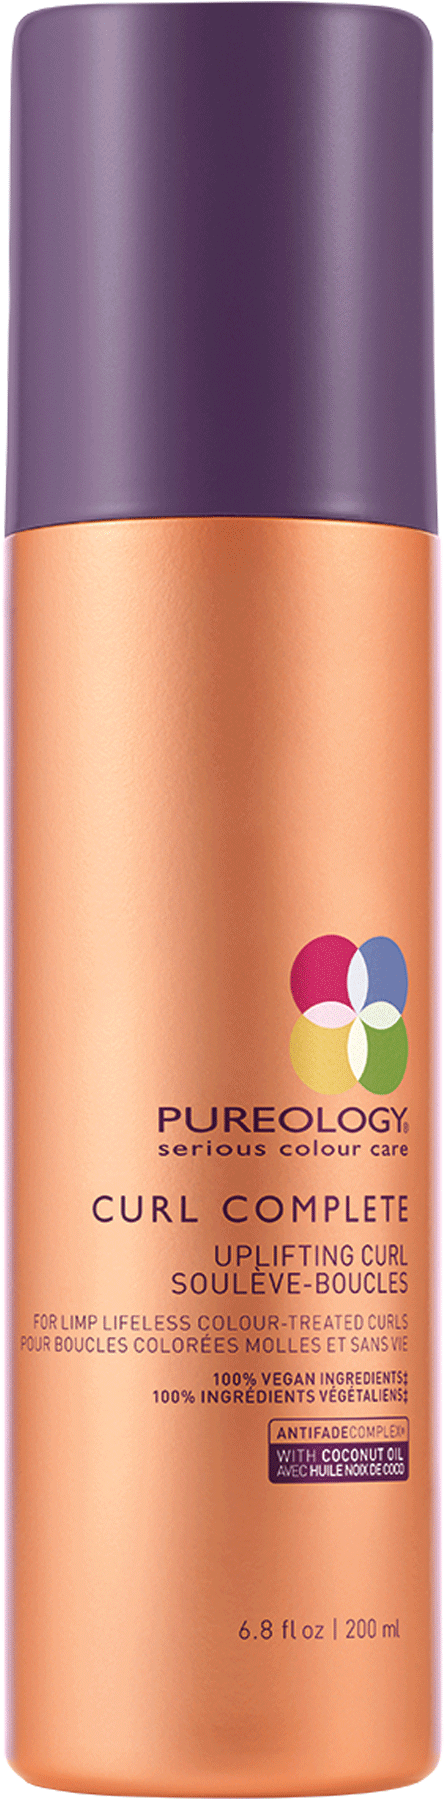 Curl Complete Uplifting Curl Spray Hair Gel - Pureology Curl Complete (1536x1800), Png Download